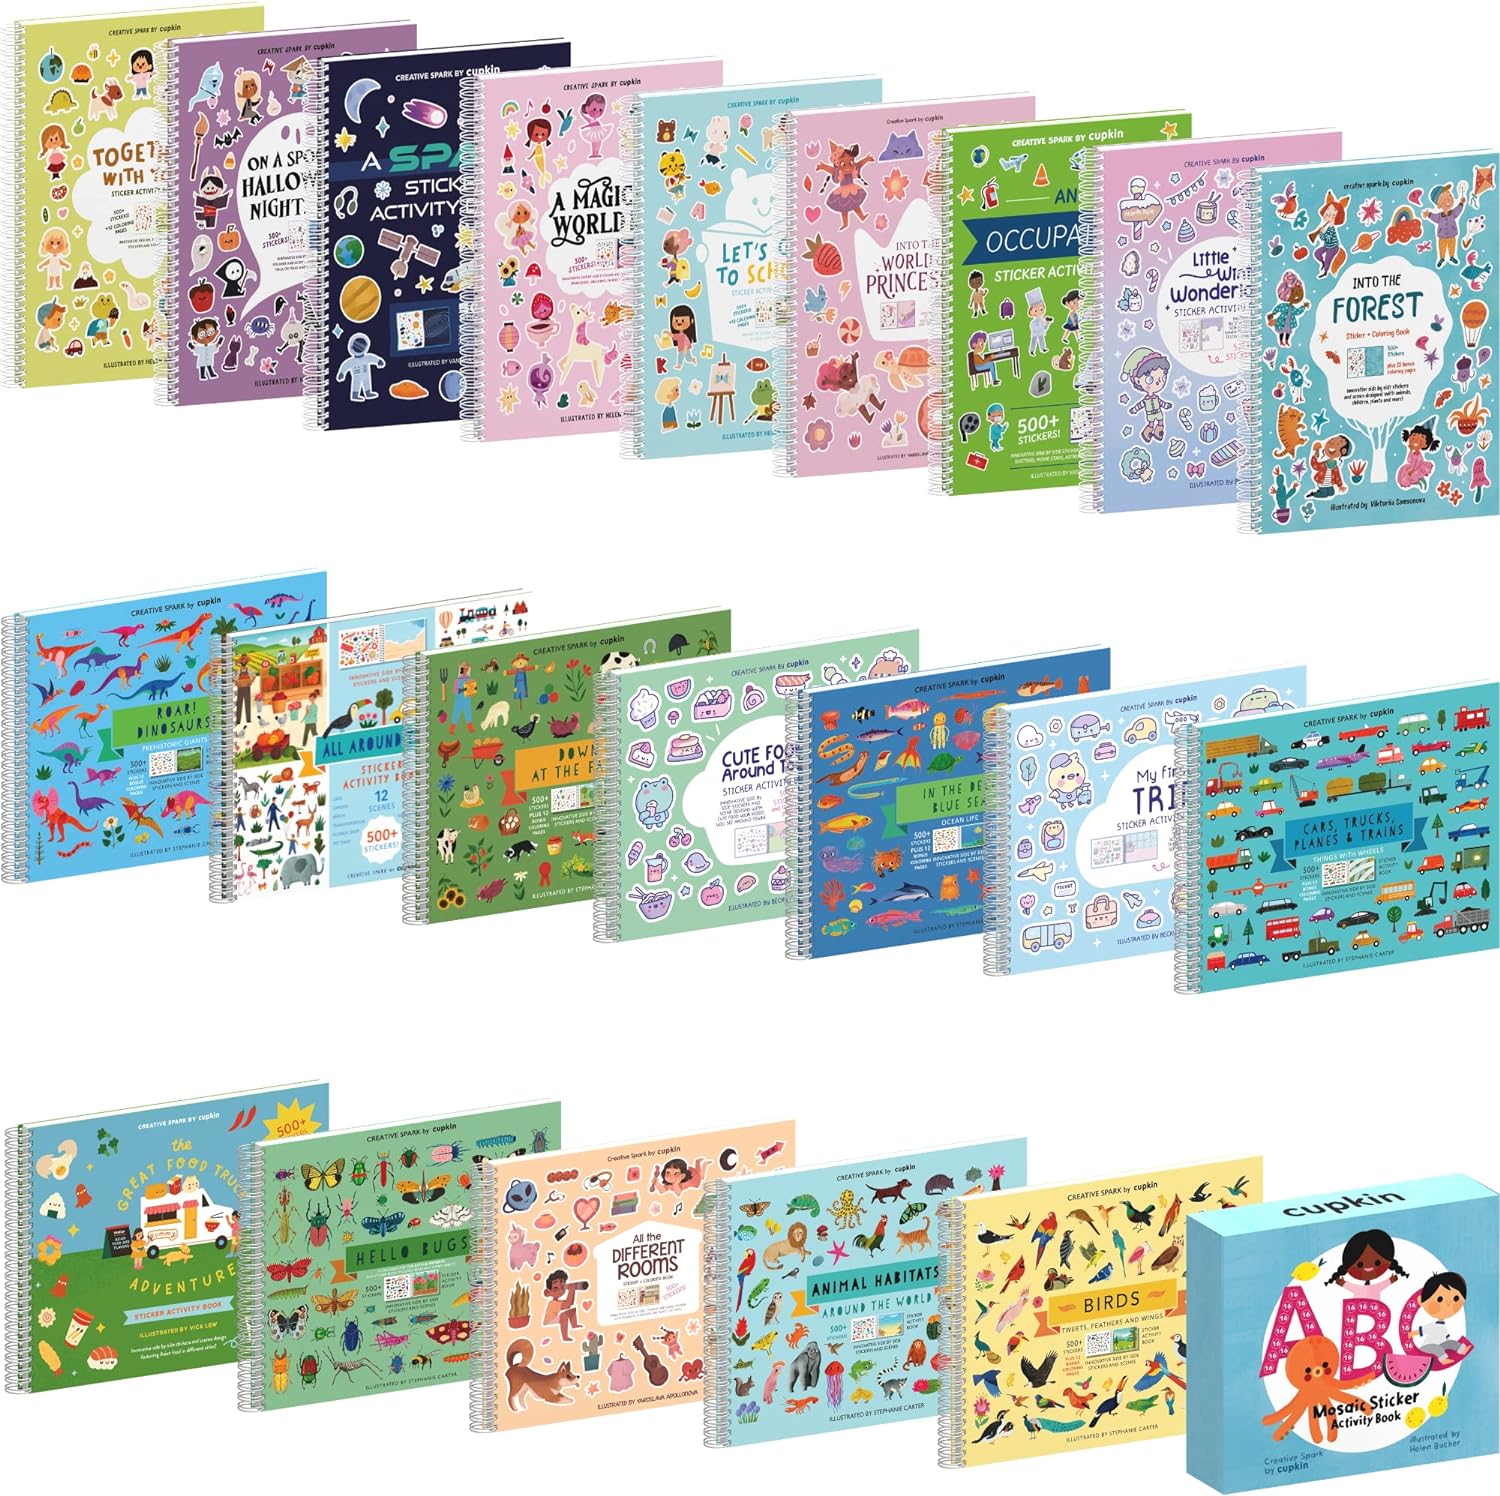 My First Trip Sticker + Coloring Book (500+ Stickers  12 Scenes) by Cupkin - Side by Side Activity Book Design - Fun Toddler Travel Essential Sticker Books for Kids 2-4 - Great for Older Boys  Girls